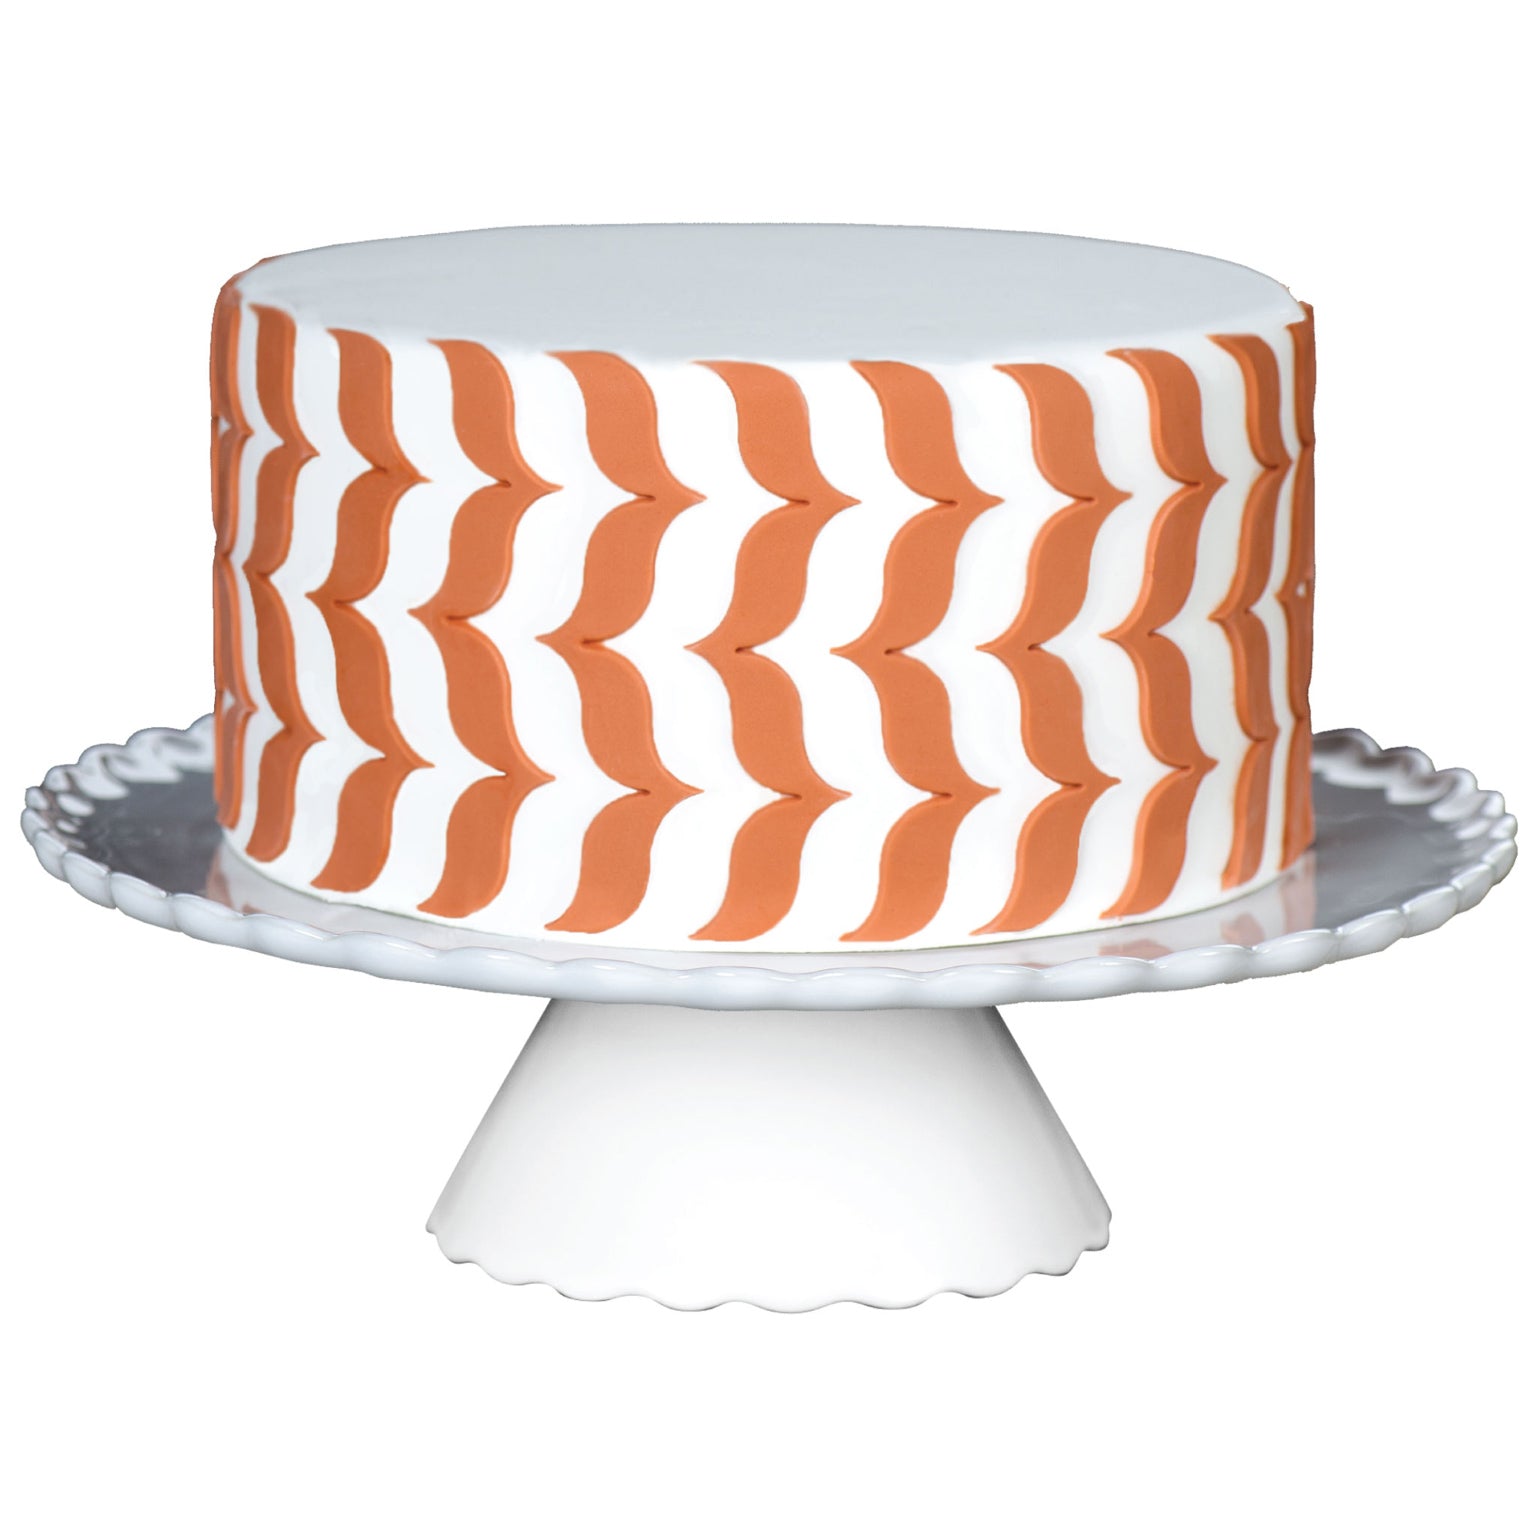 How To Create Striped Buttercream Cakes With A Cake Comb - Sugar & Sparrow